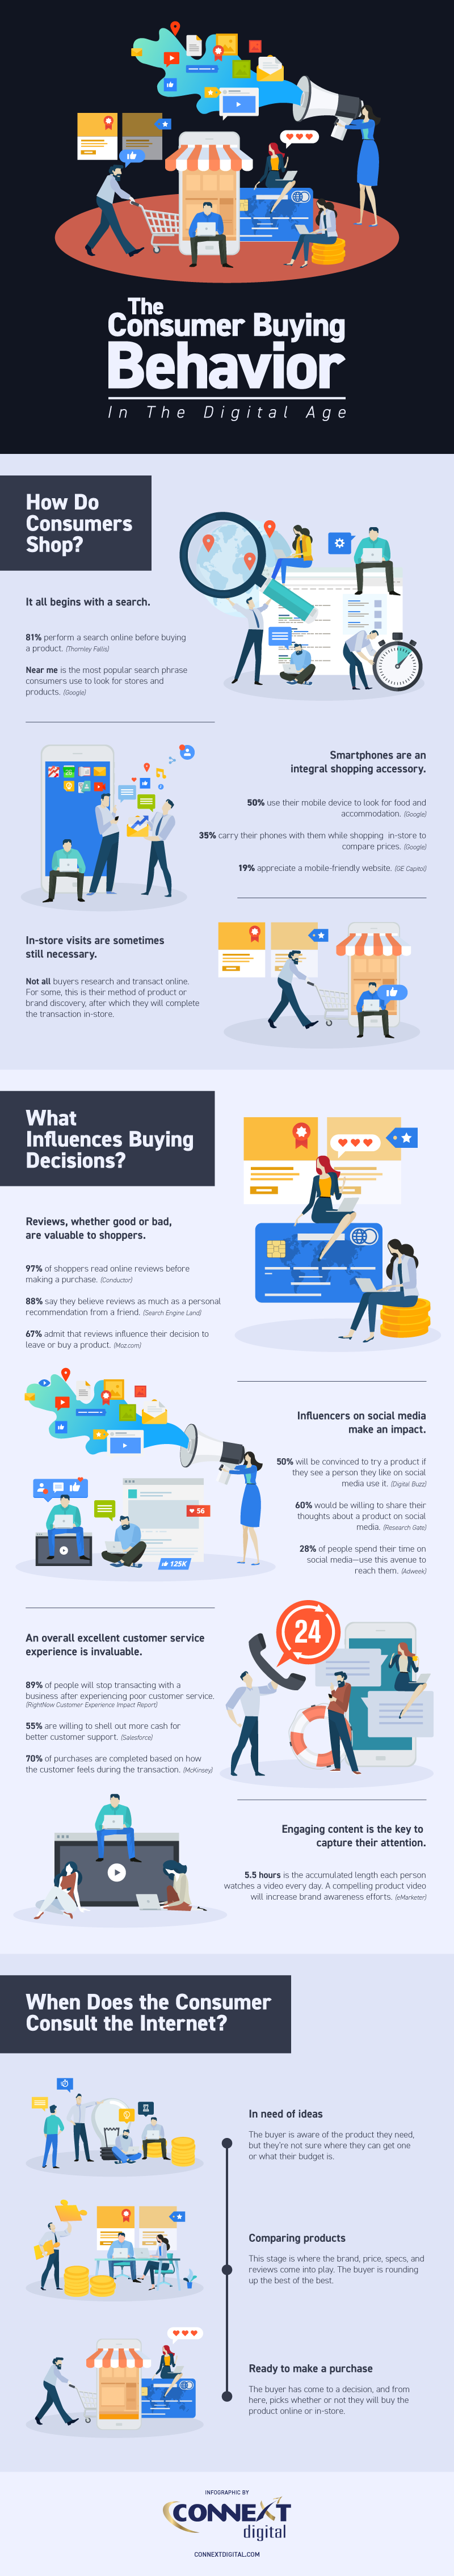 The Consumer Buying Behavior in the Digital Age Infographic